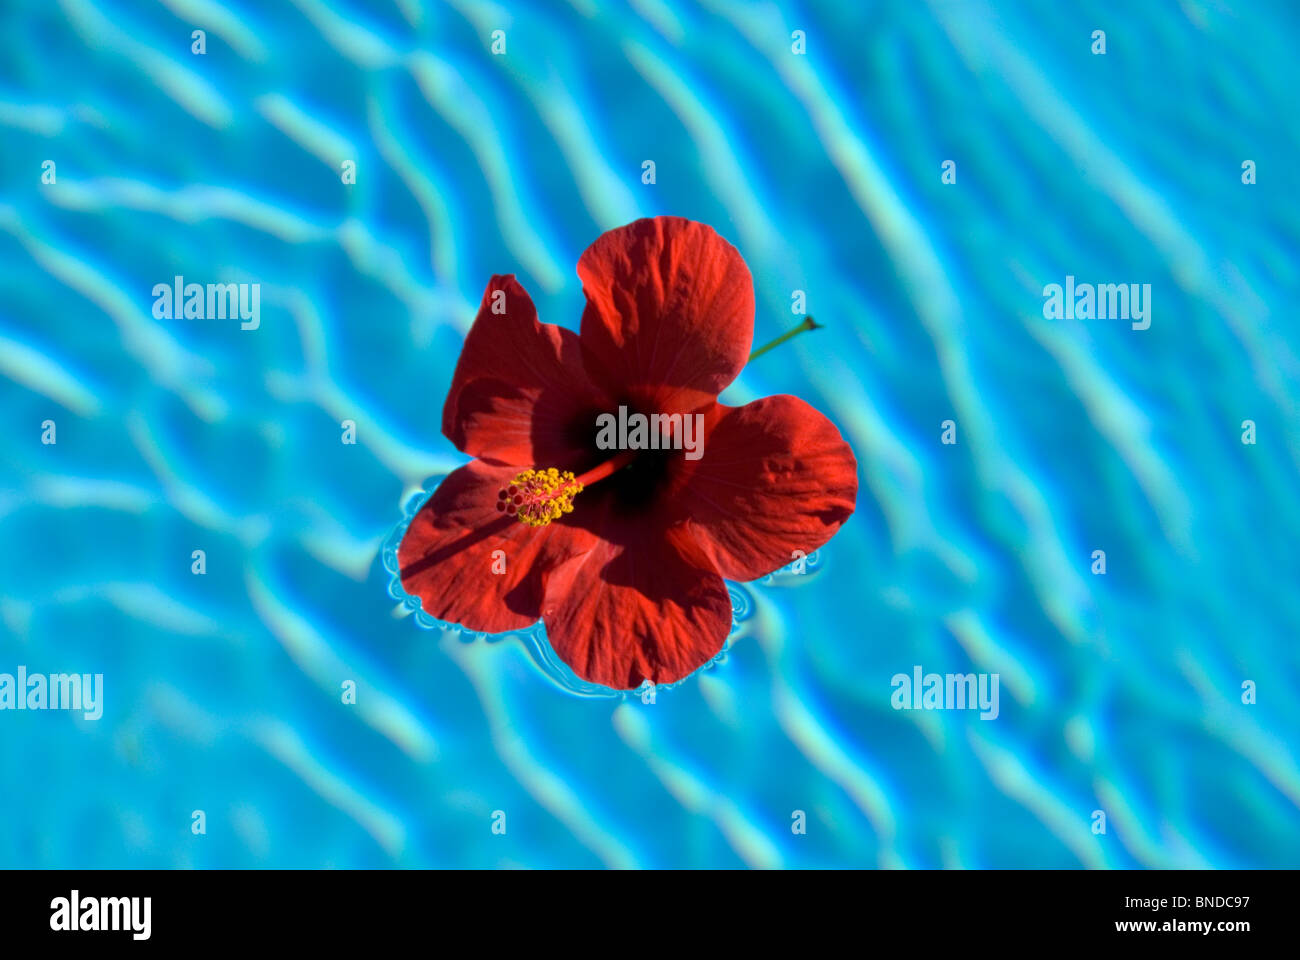 Red hibiscus flower, fallen from shrub, floats on the swimming pool surface Stock Photo